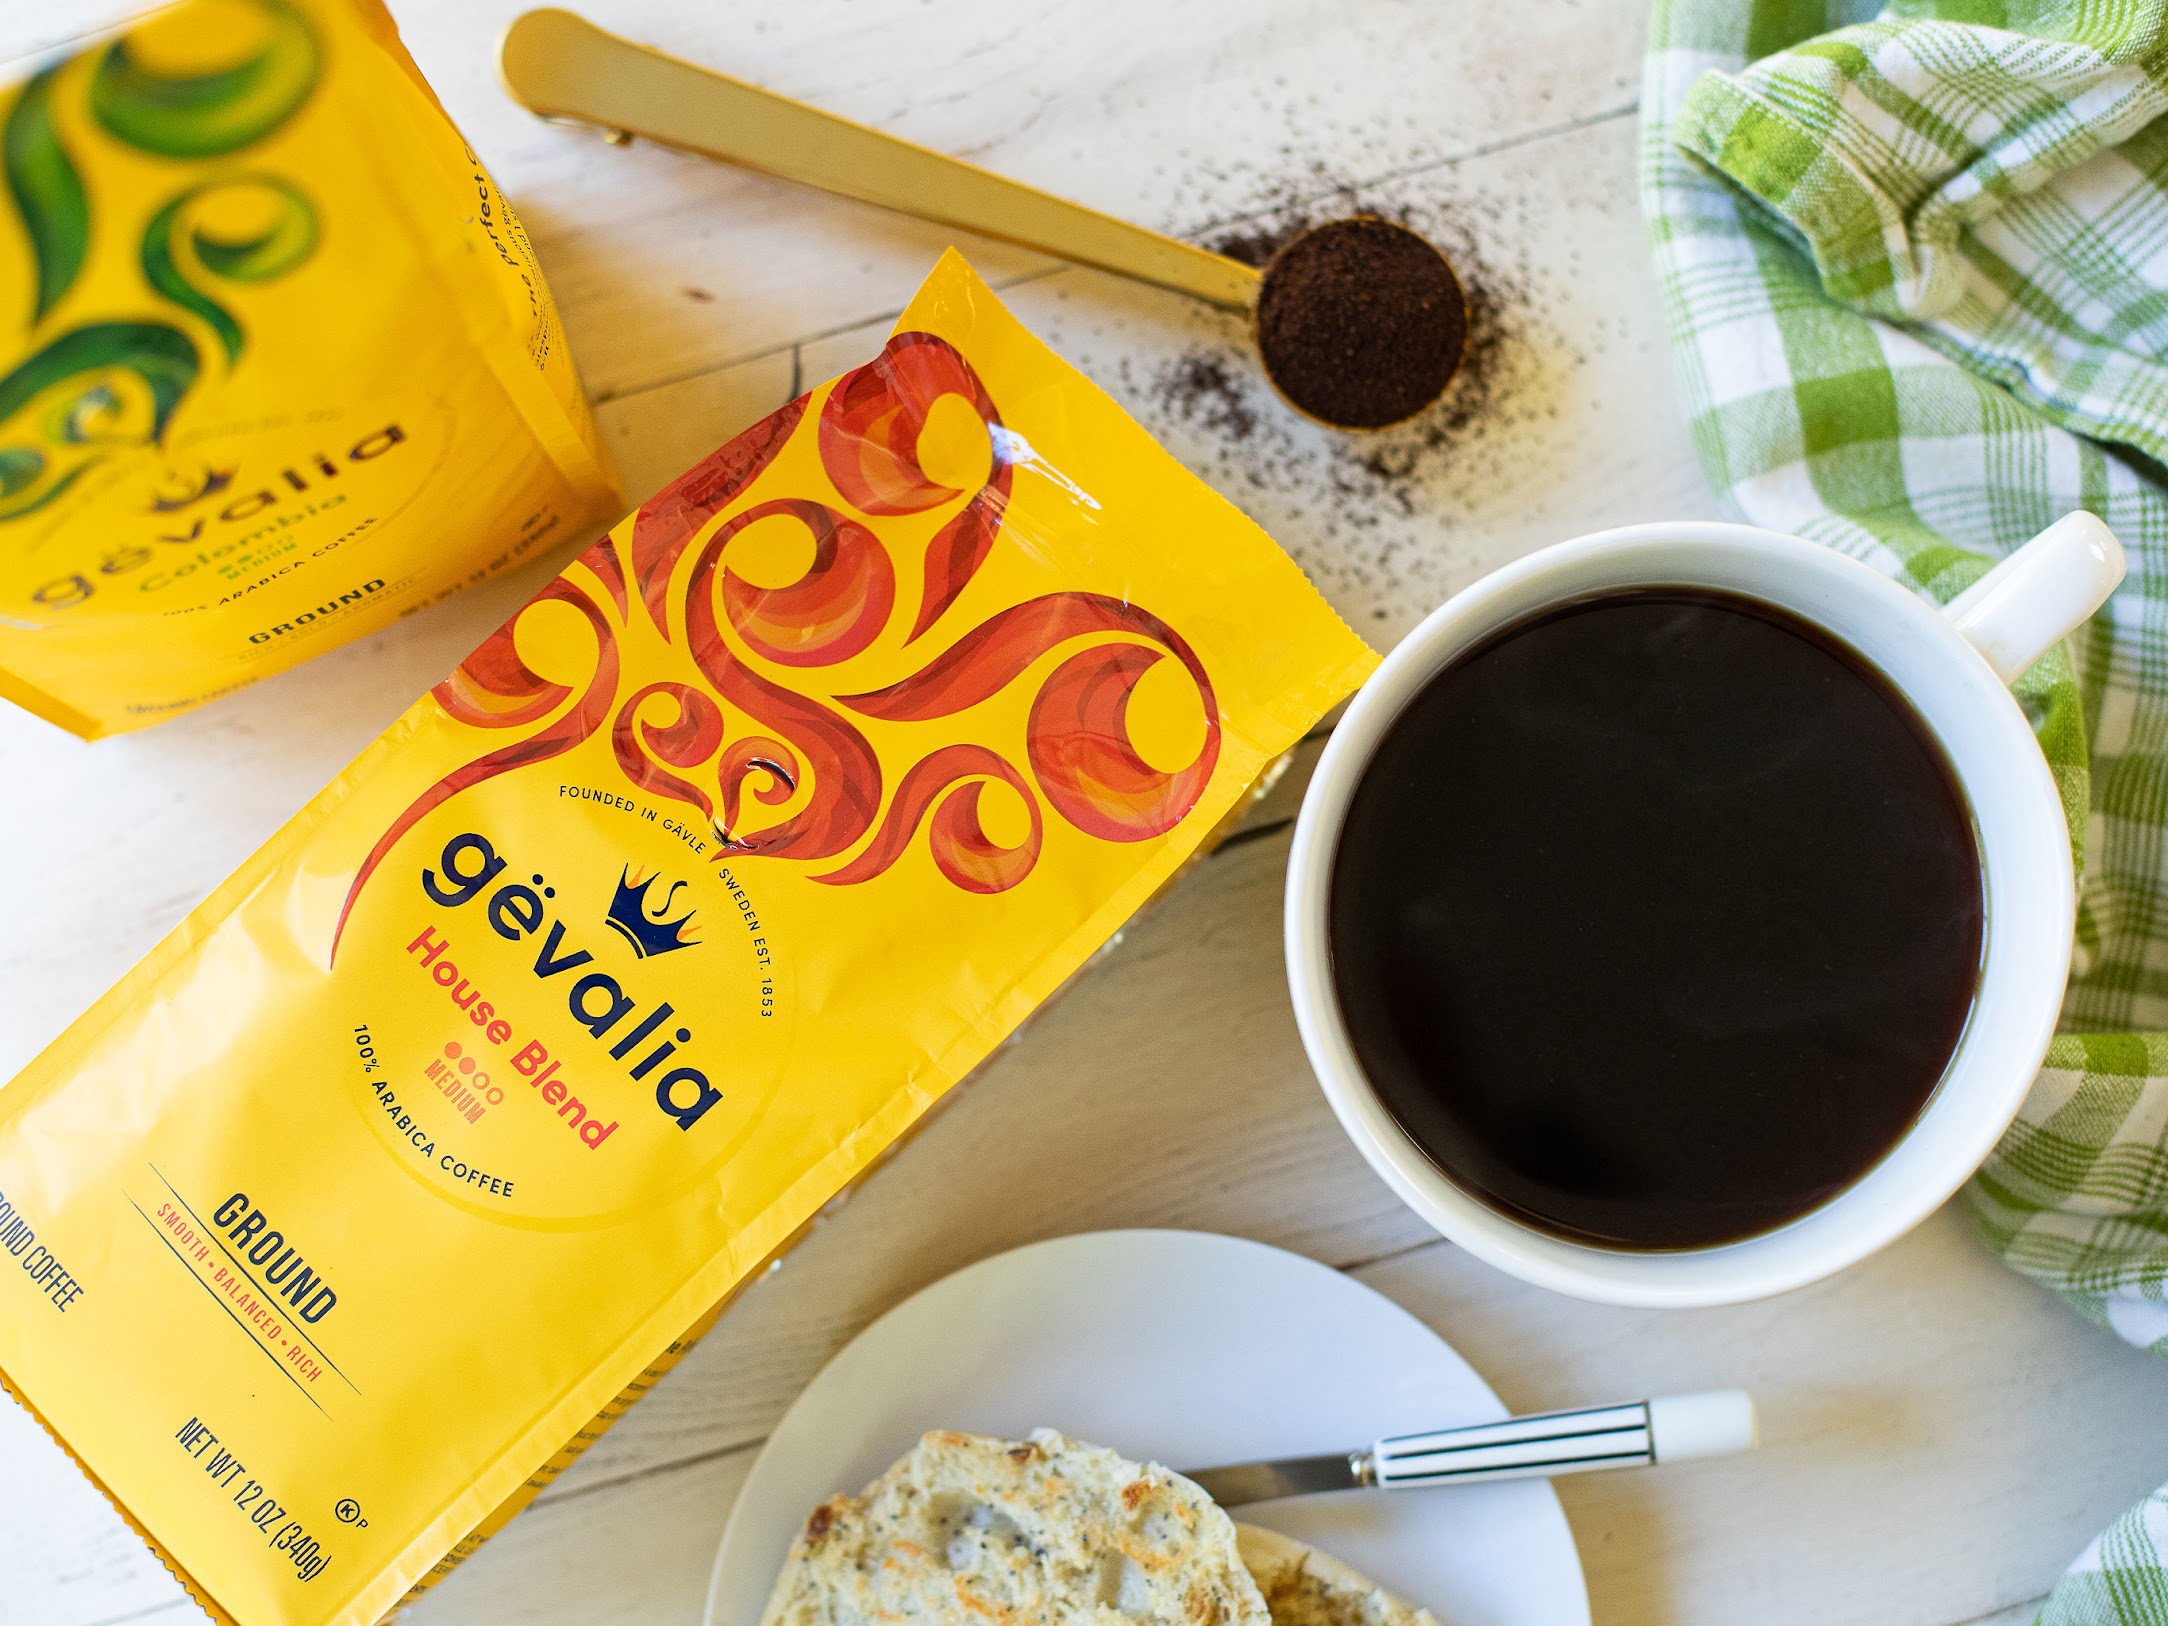 Your Favorite Gevalia Coffee Products Are Buy One, Get One FREE At Publix - Stock Up And Save! on I Heart Publix